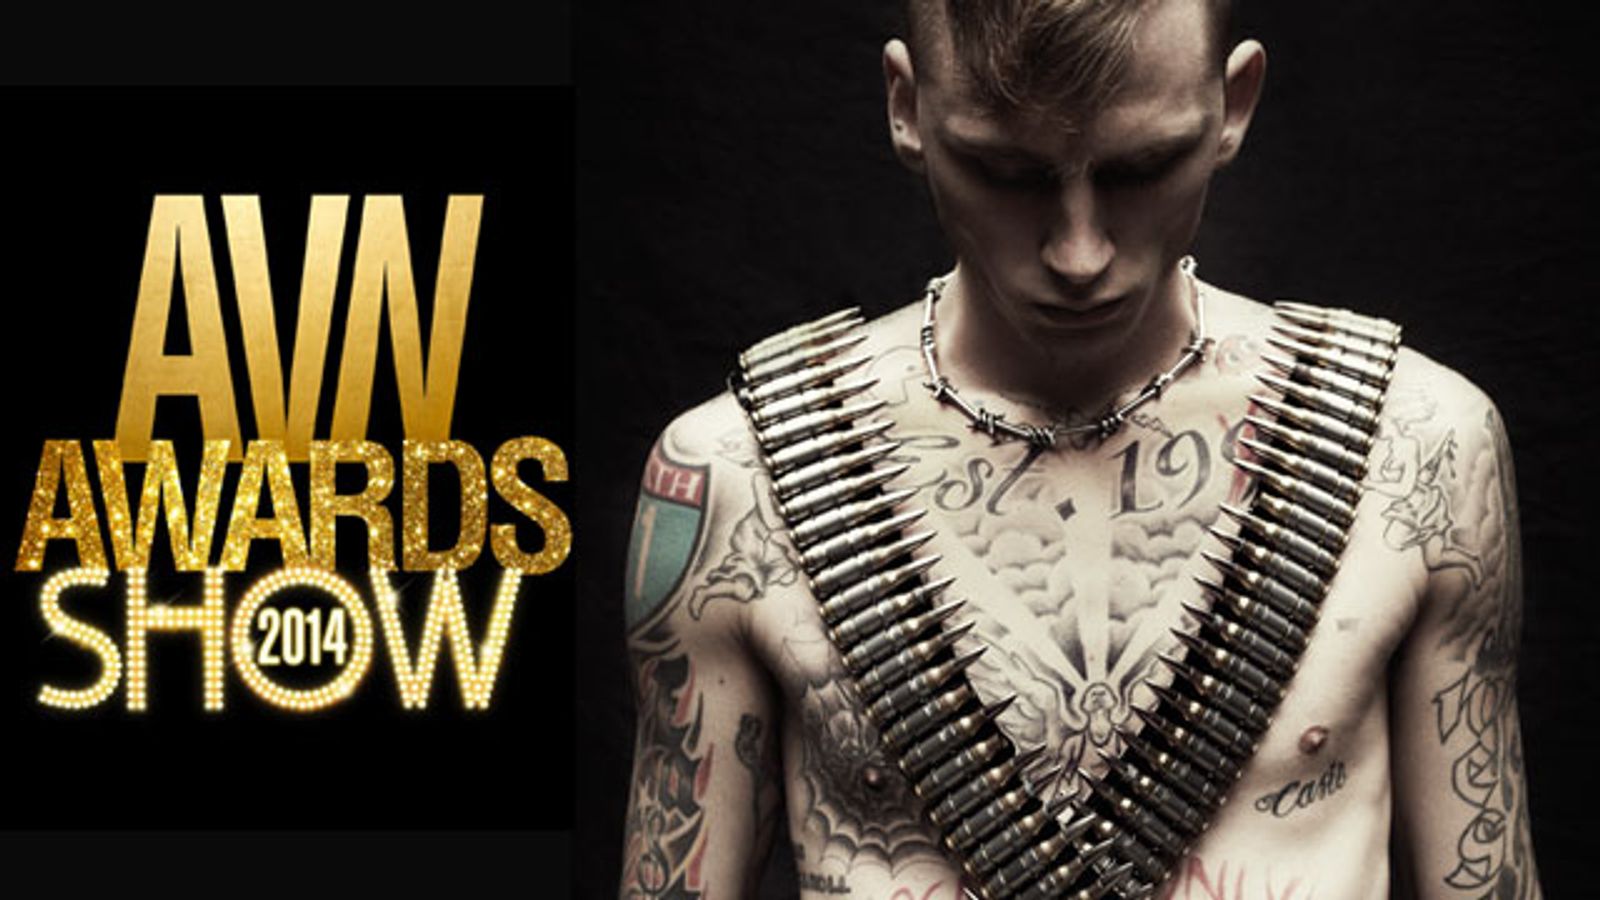 Rapper Machine Gun Kelly Enlisted as 2014 AVN Awards Music Act